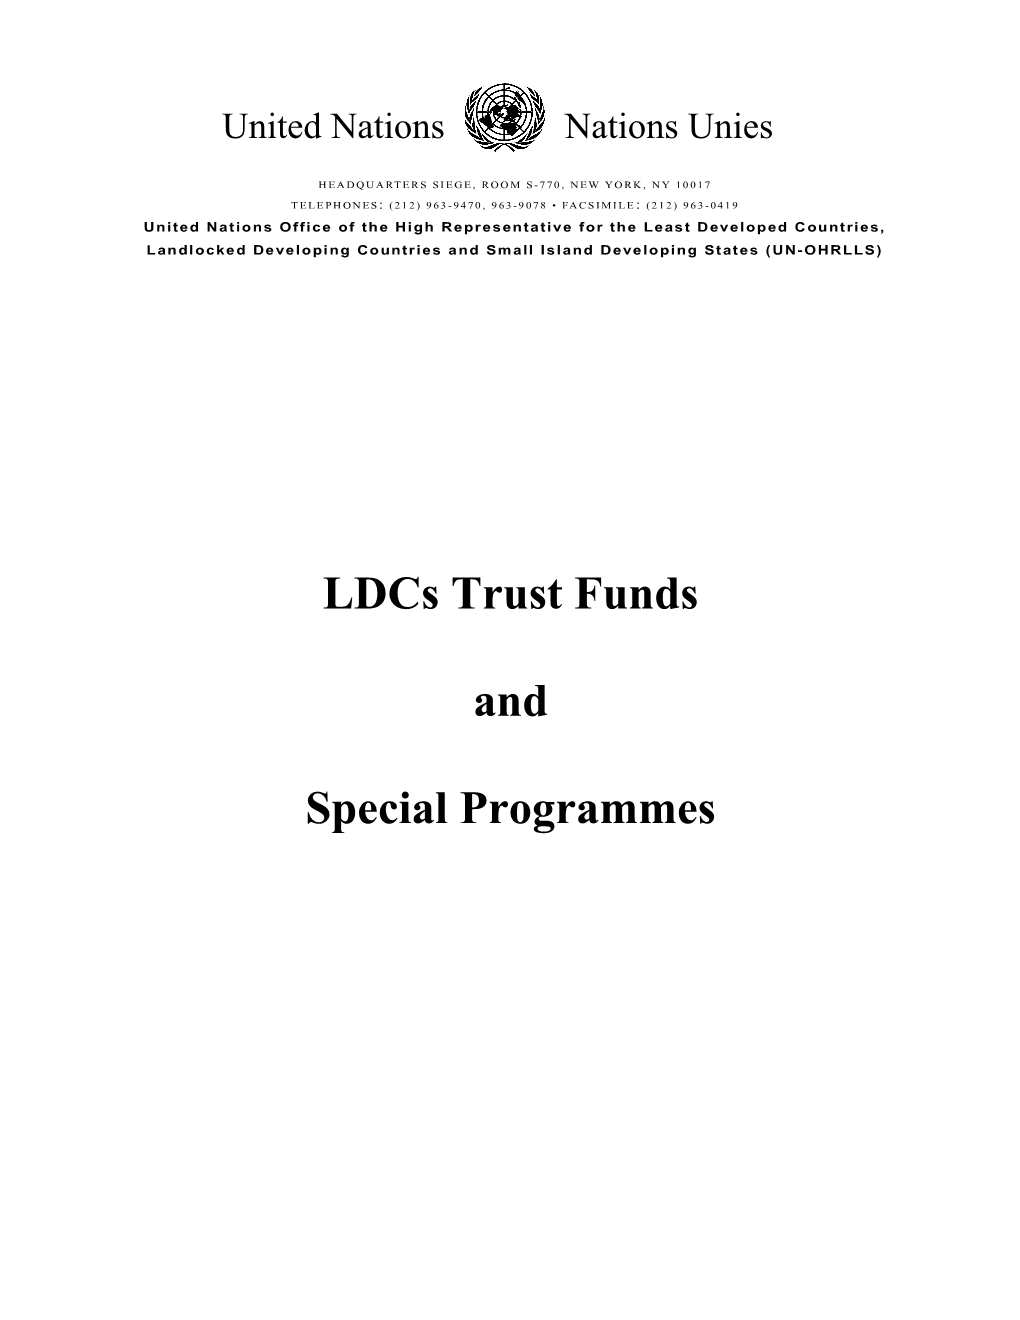 The WMO Programme and WMO Trust Fund for Ldcs